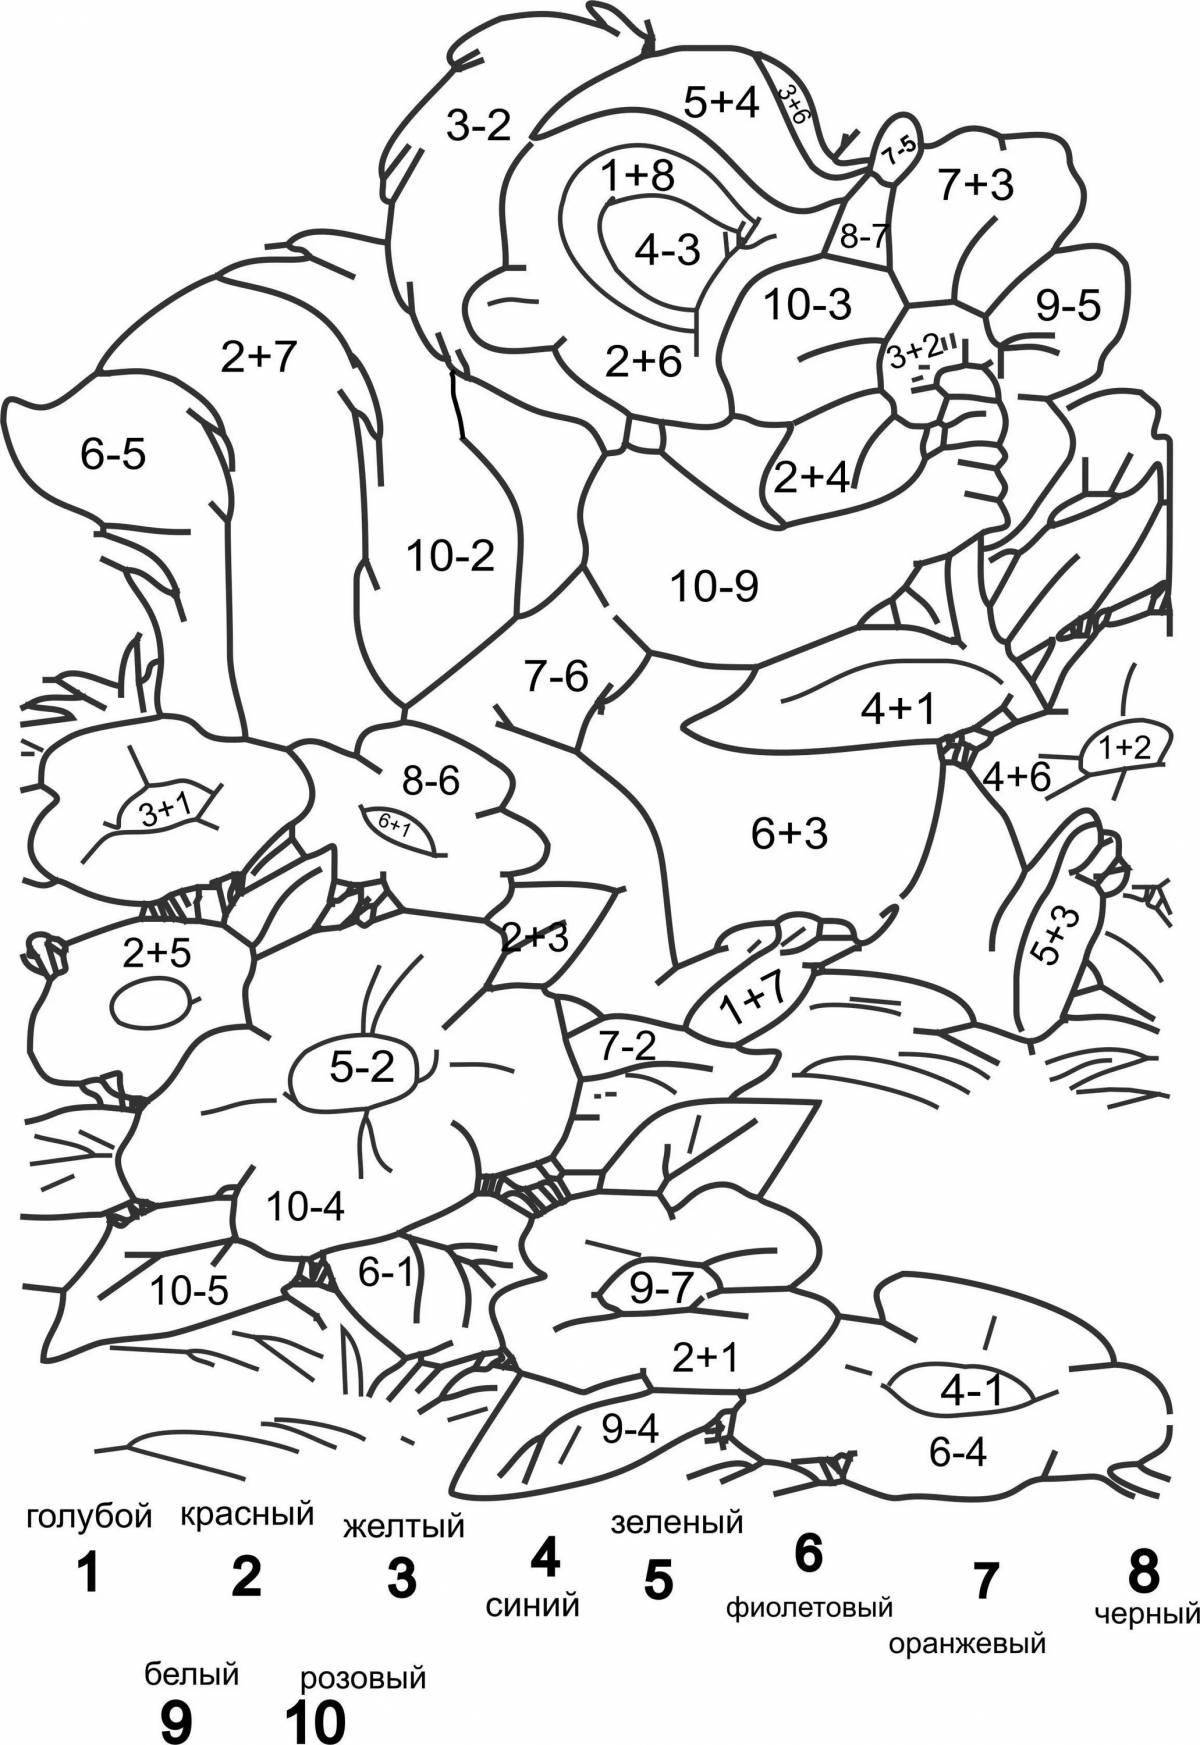 Colorful mi 1 class coloring page